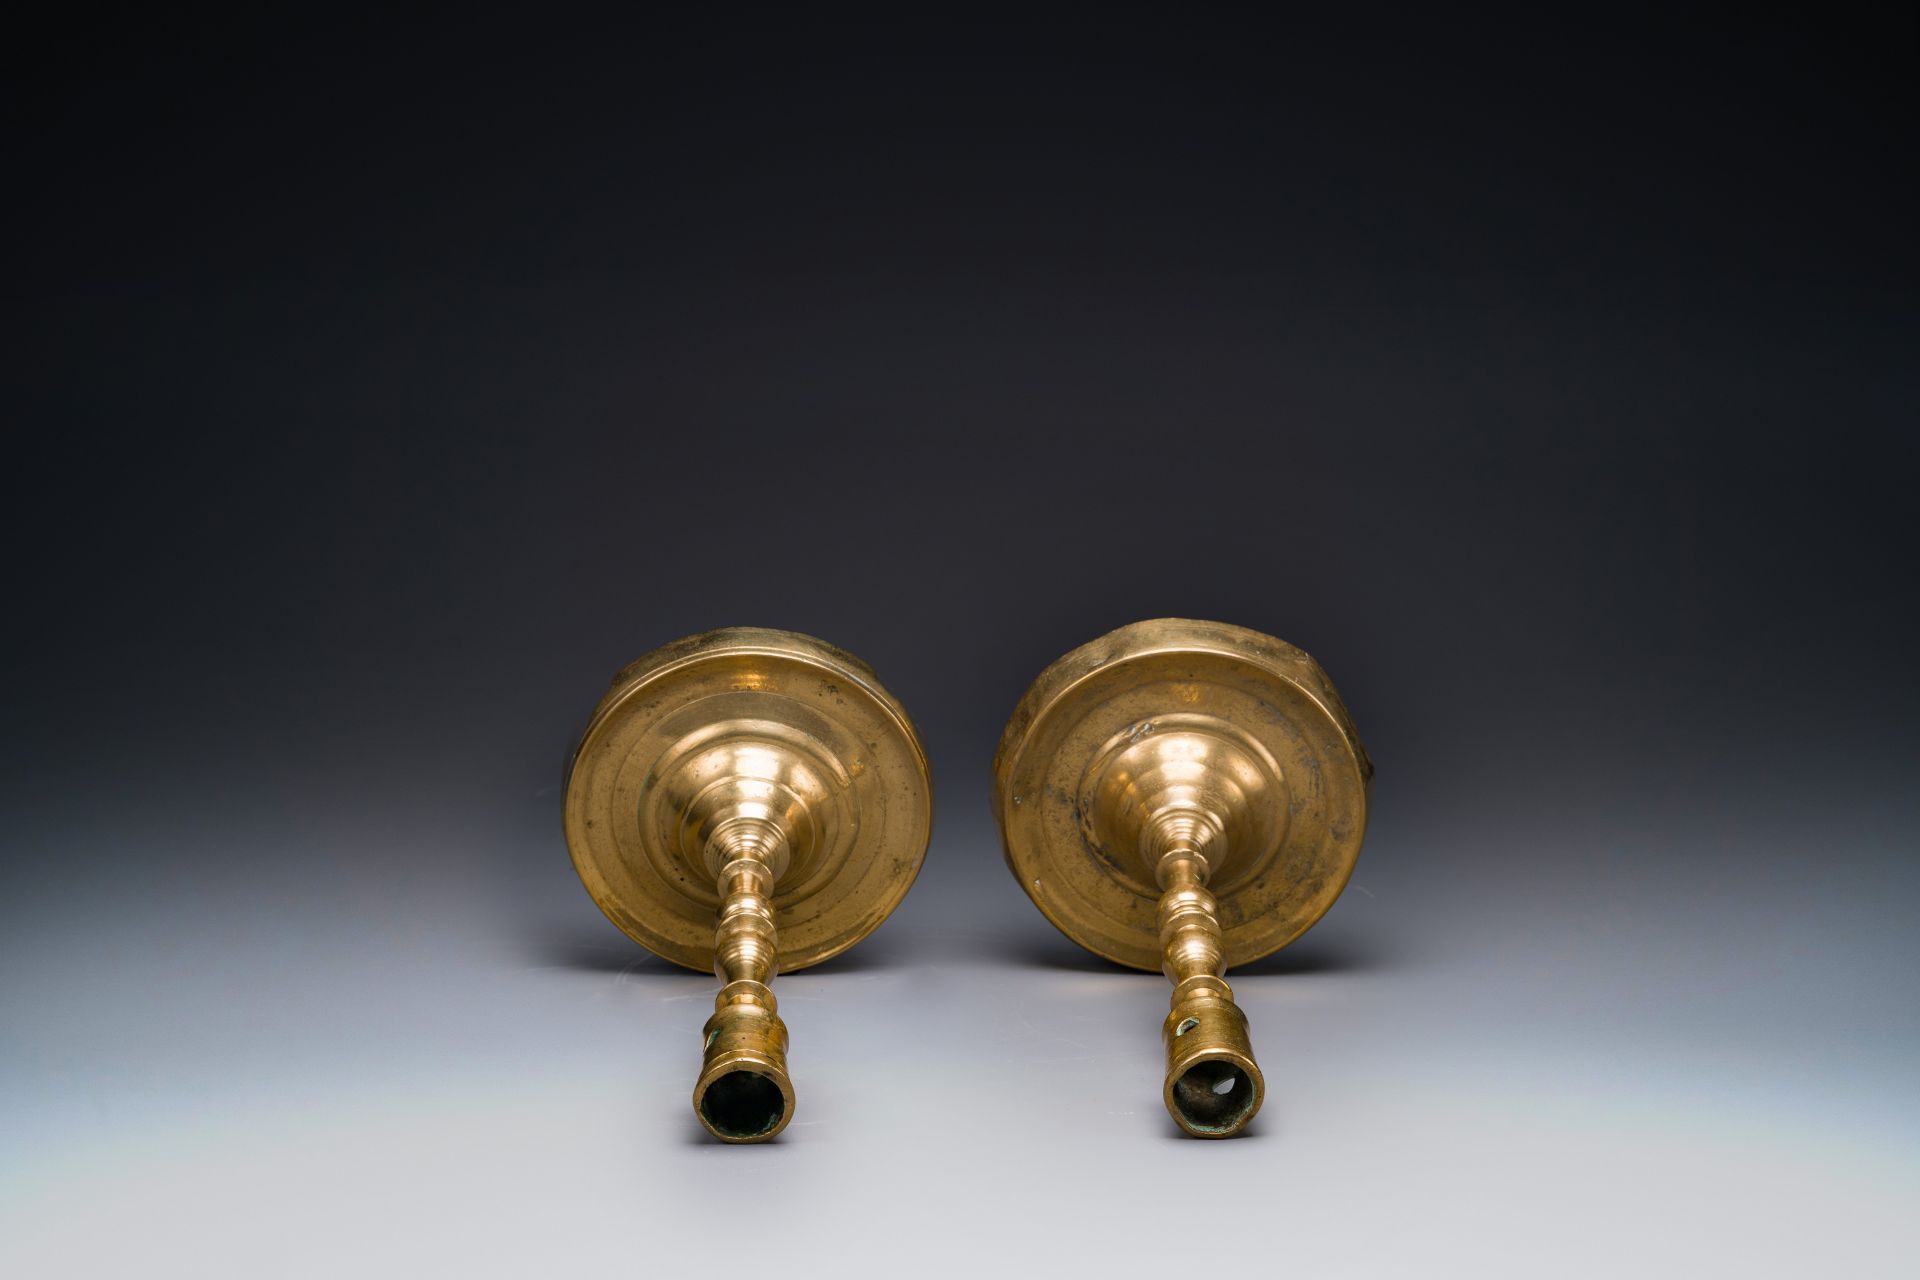 A pair of Flemish or Dutch knotted bronze candlesticks, 16th C. - Image 4 of 8